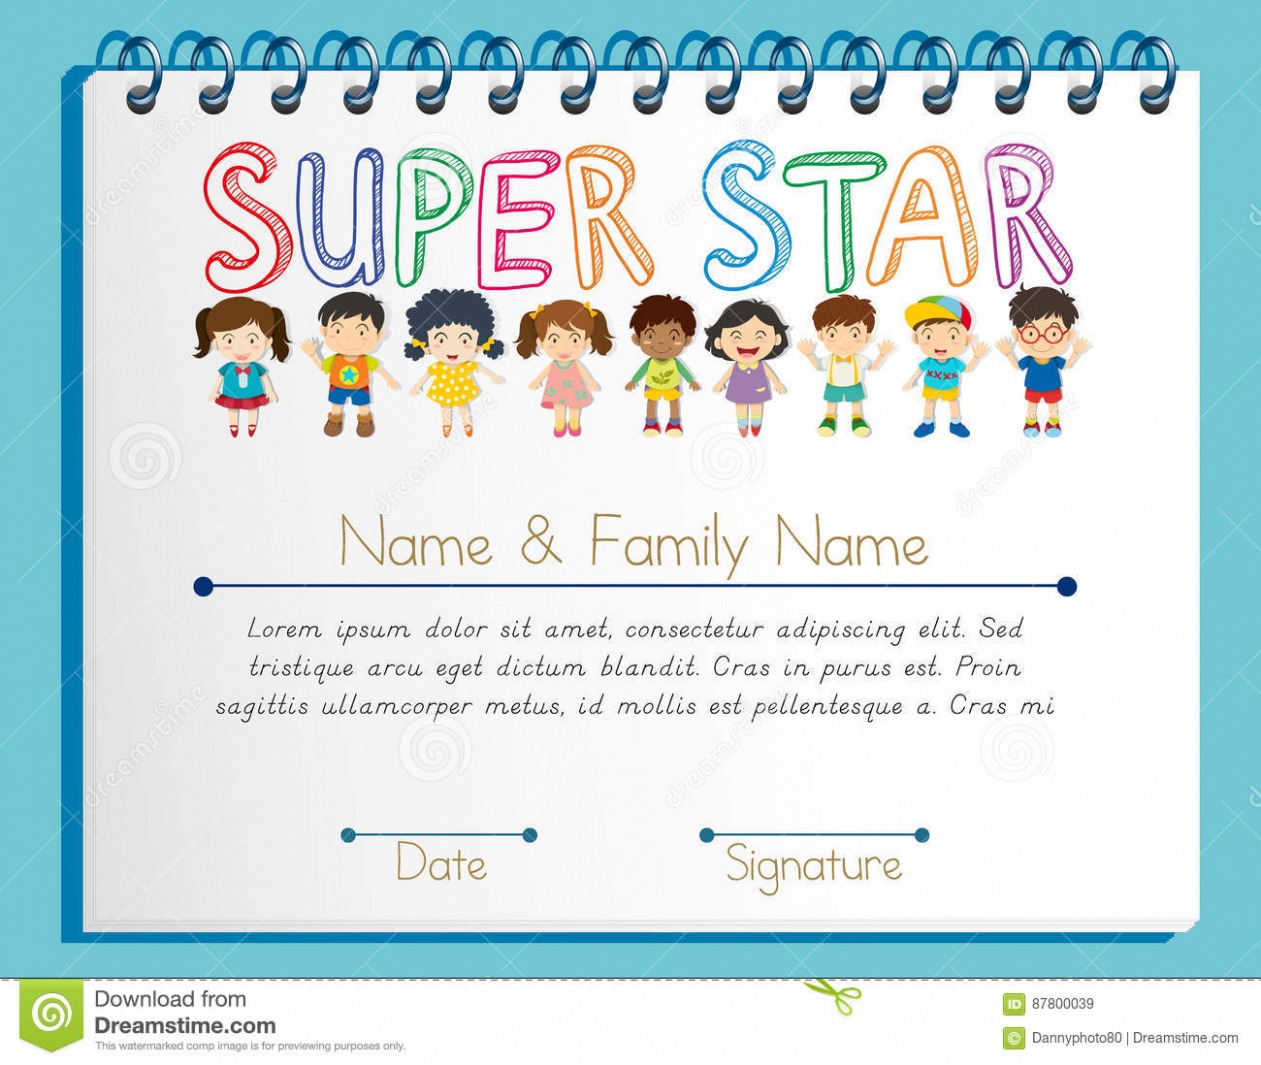 Printable Star Student Certificate Template Excel